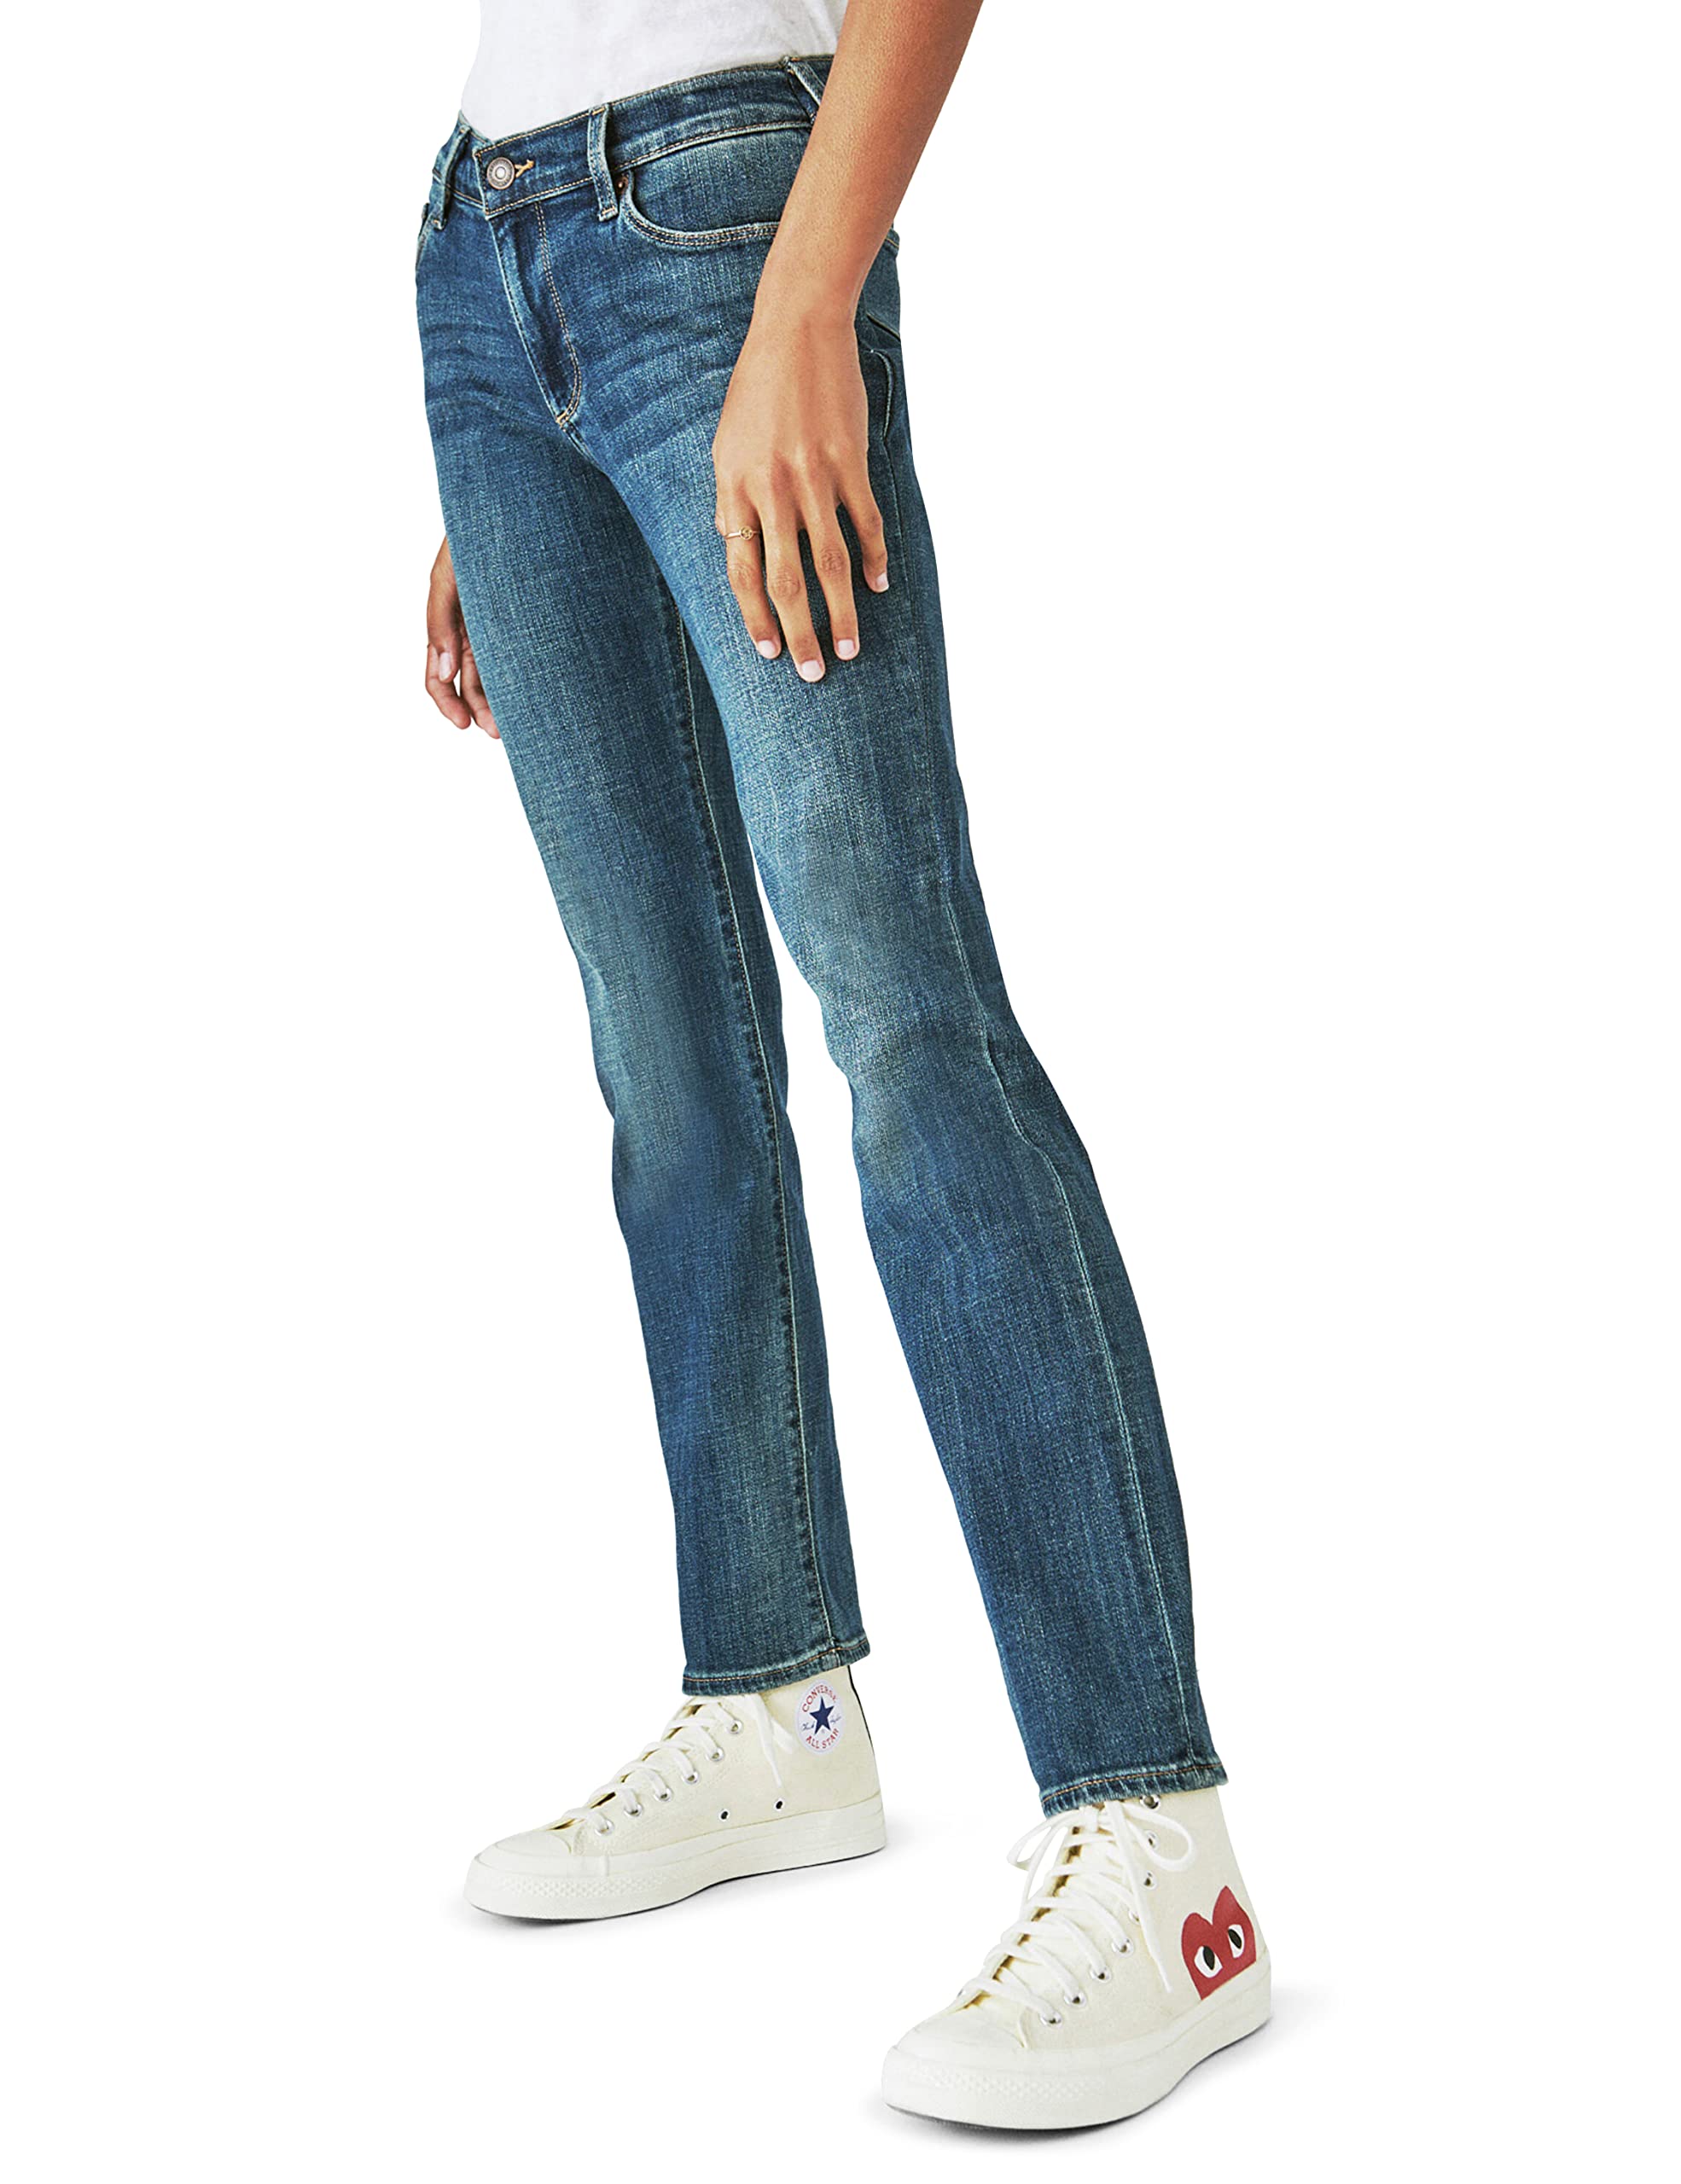 Lucky Brand Women's Mid Rise Sweet Straight Jeans